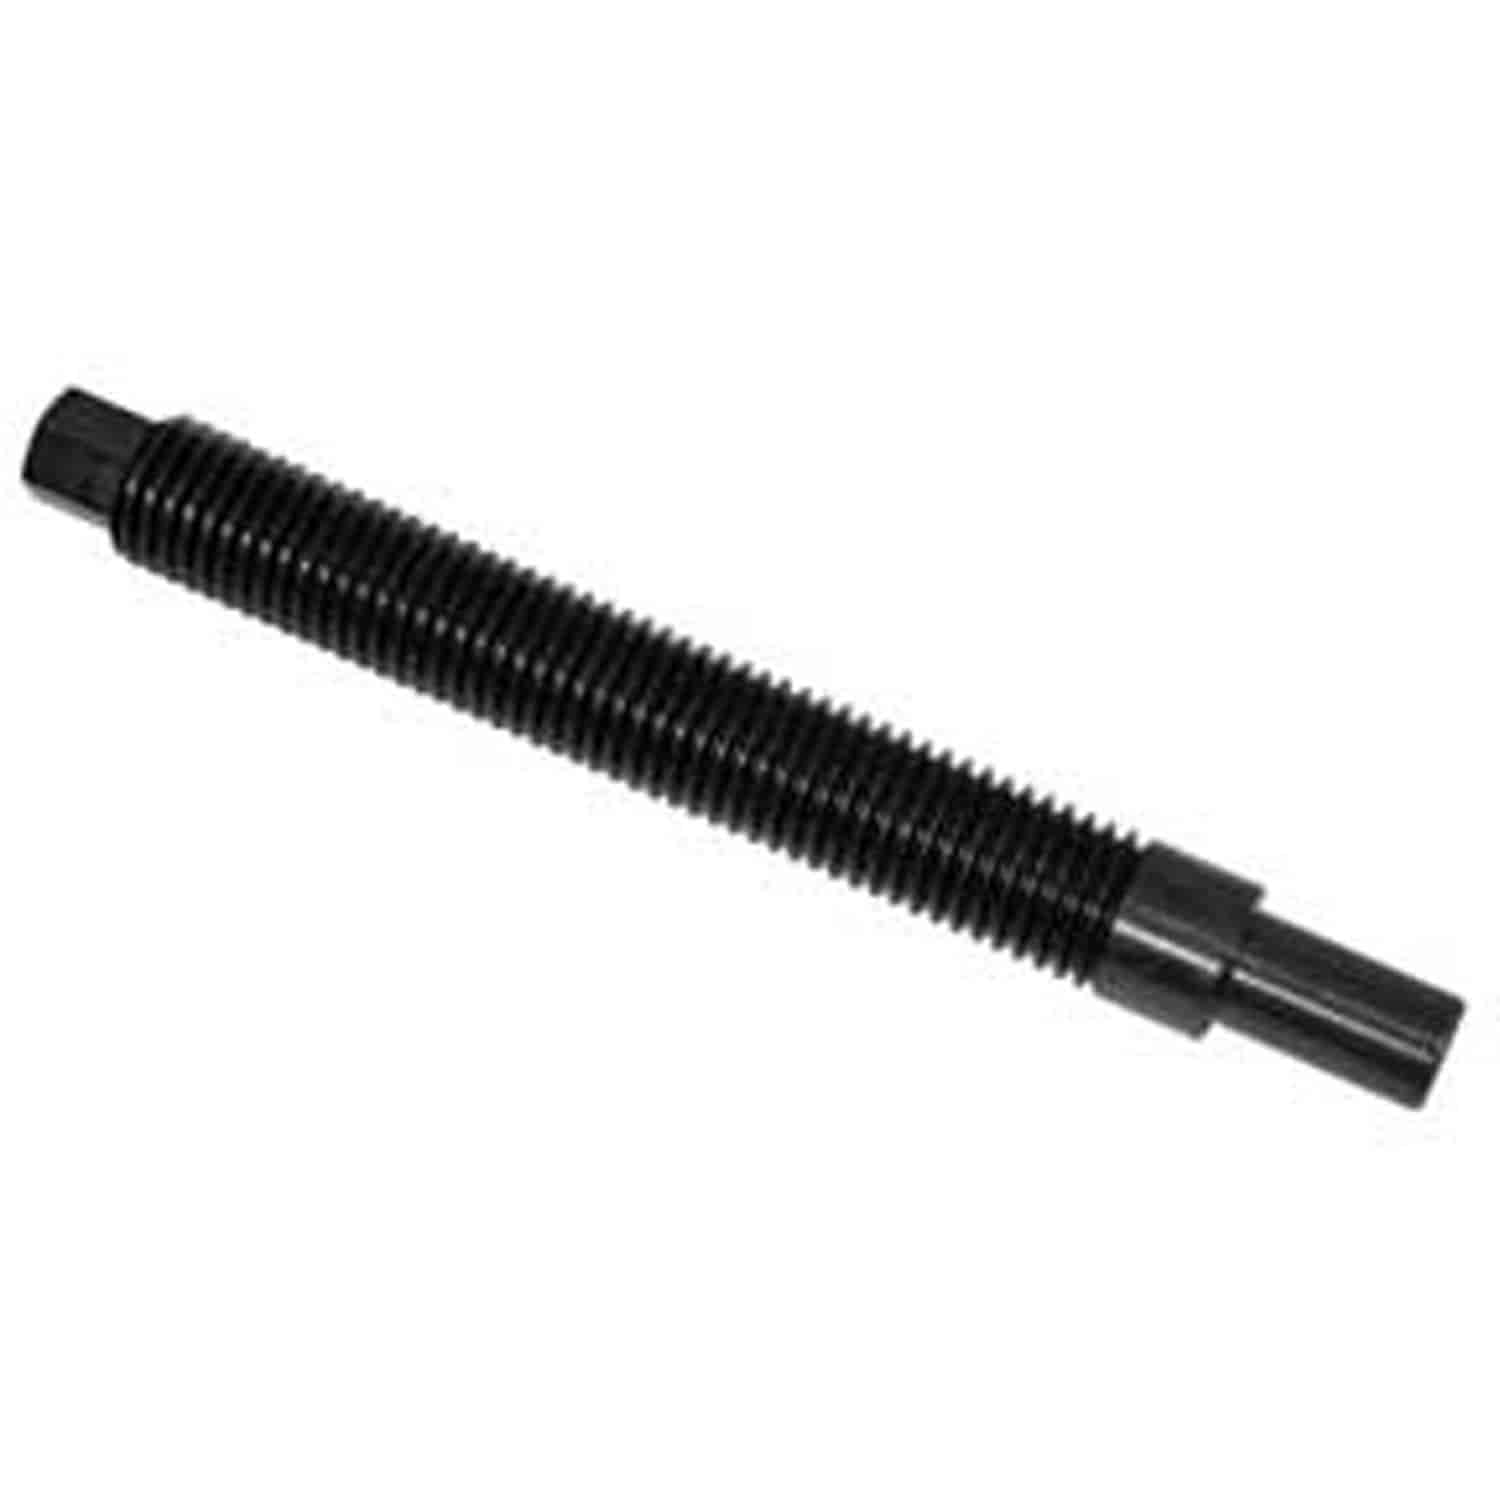 LONG FORCING SCREW